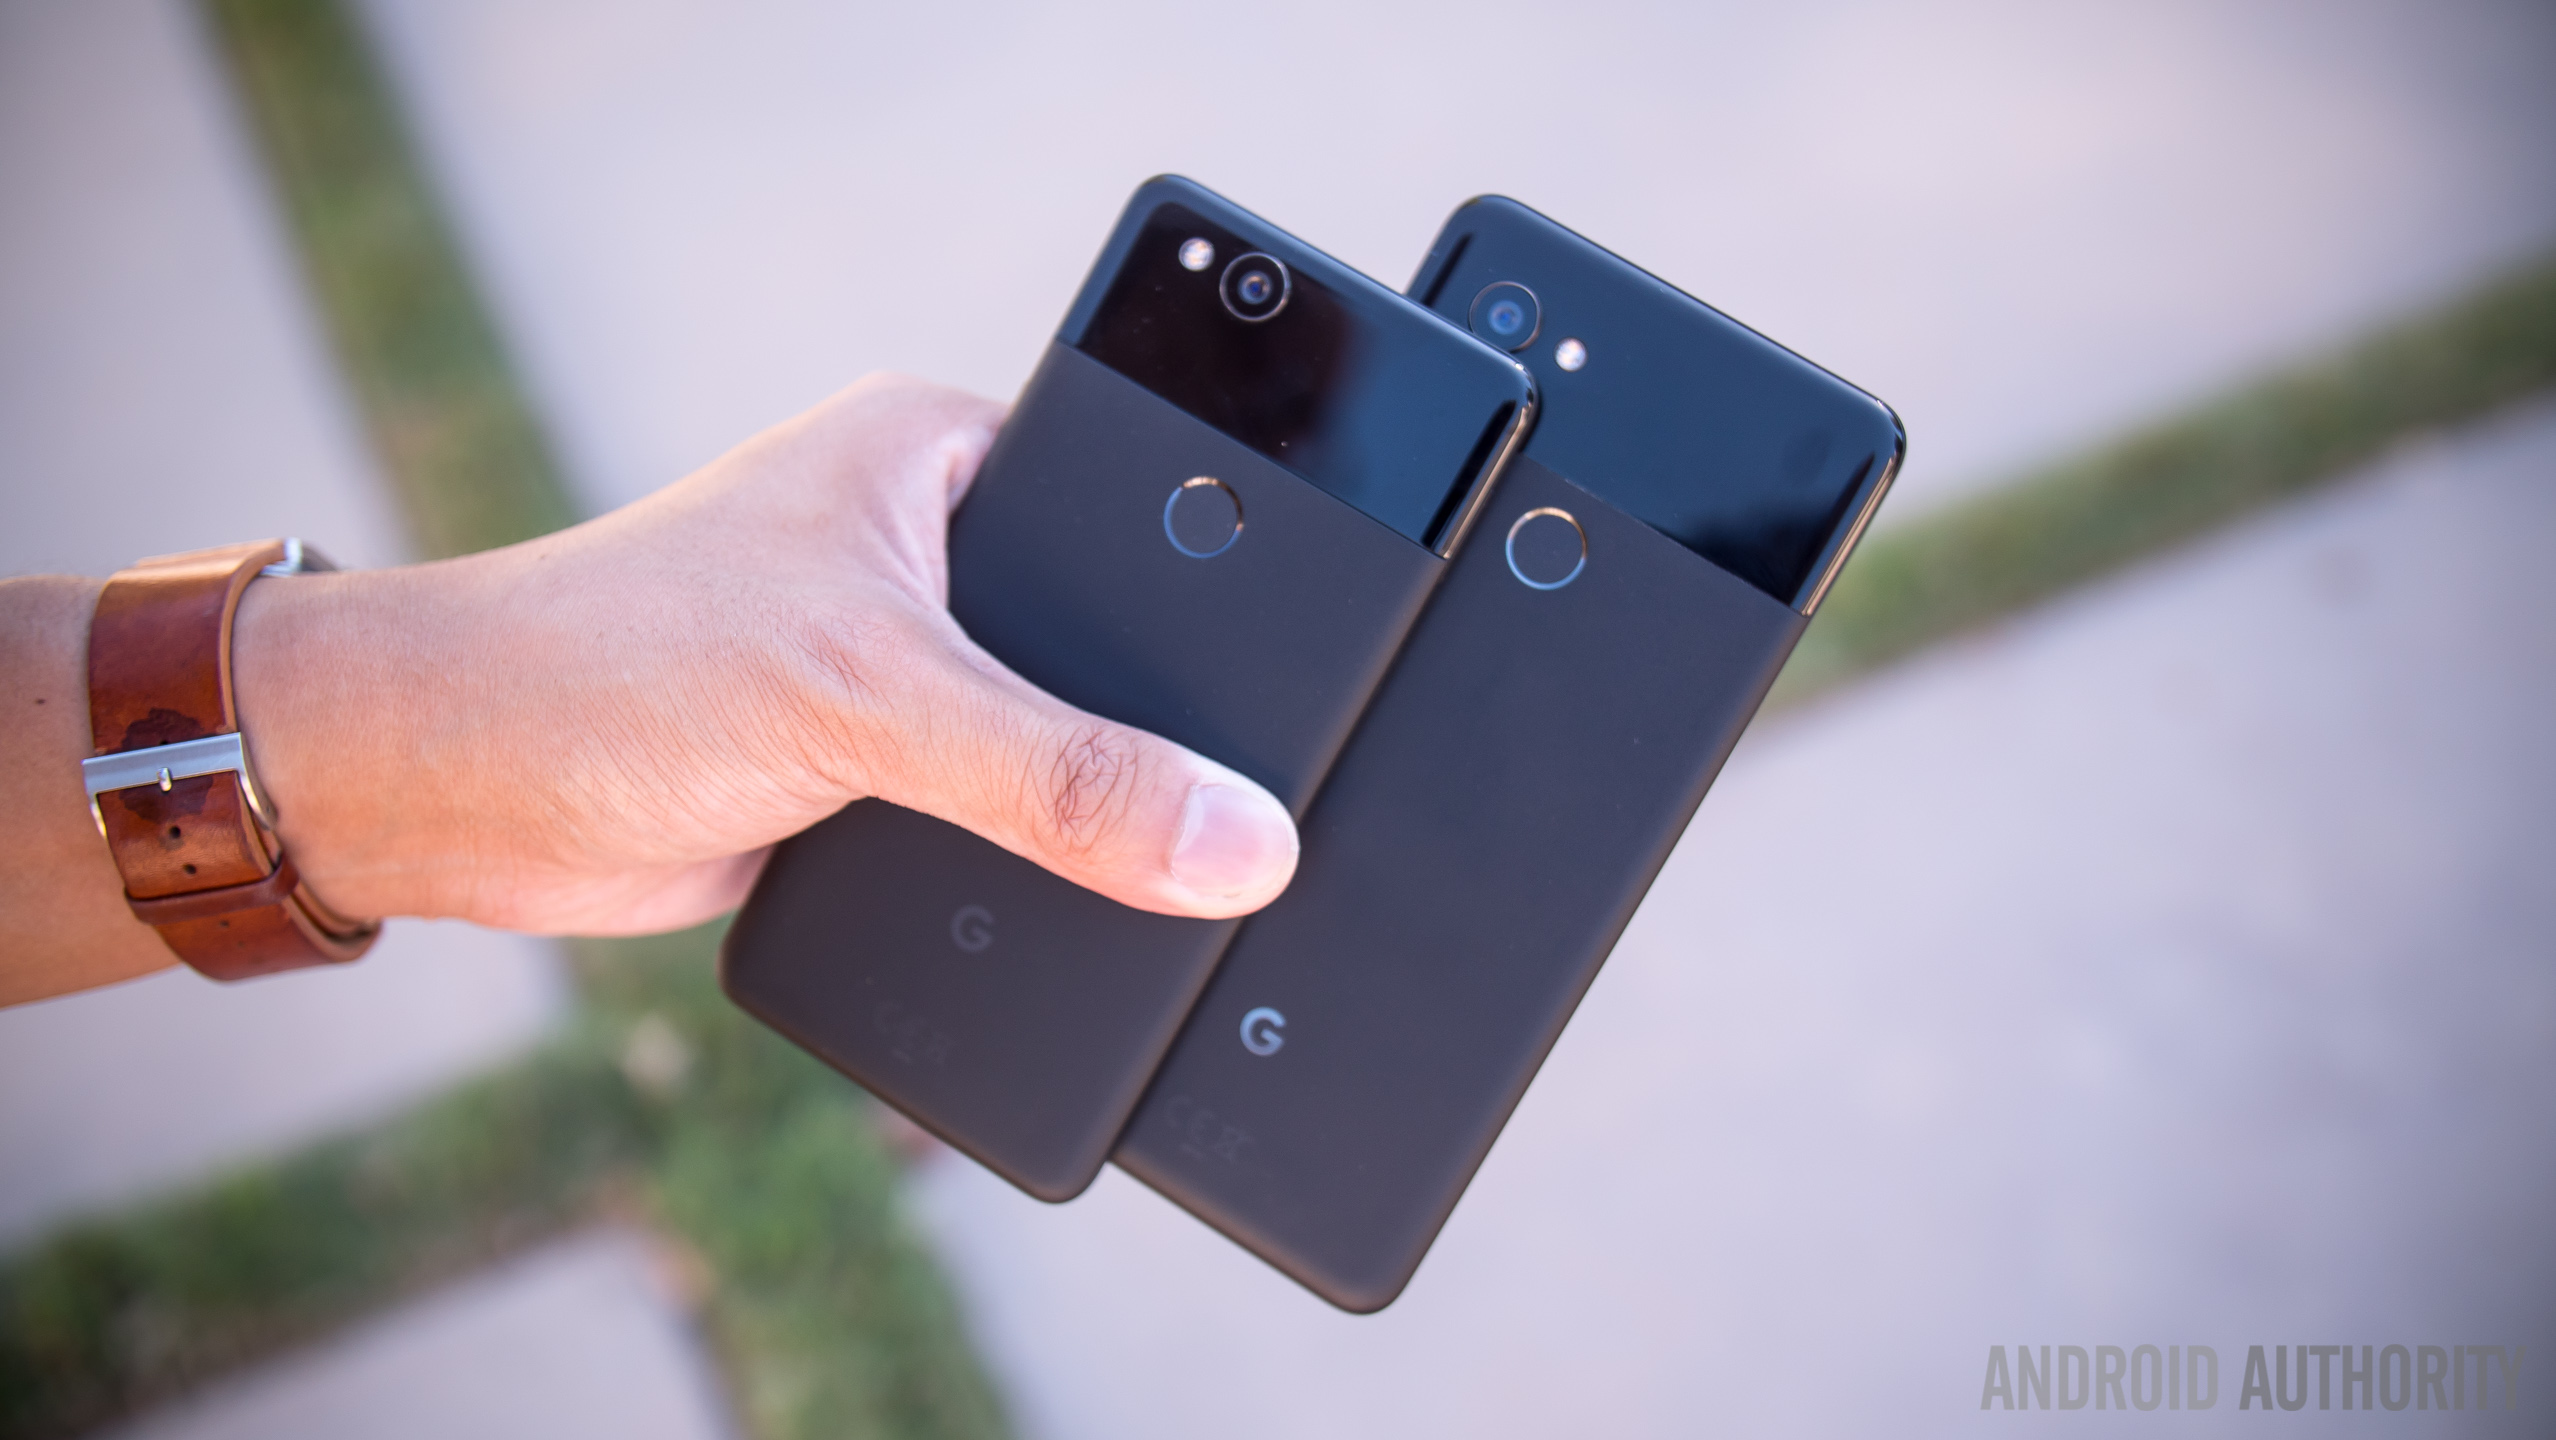 The Google Pixel 2 and Pixel 2 XL.